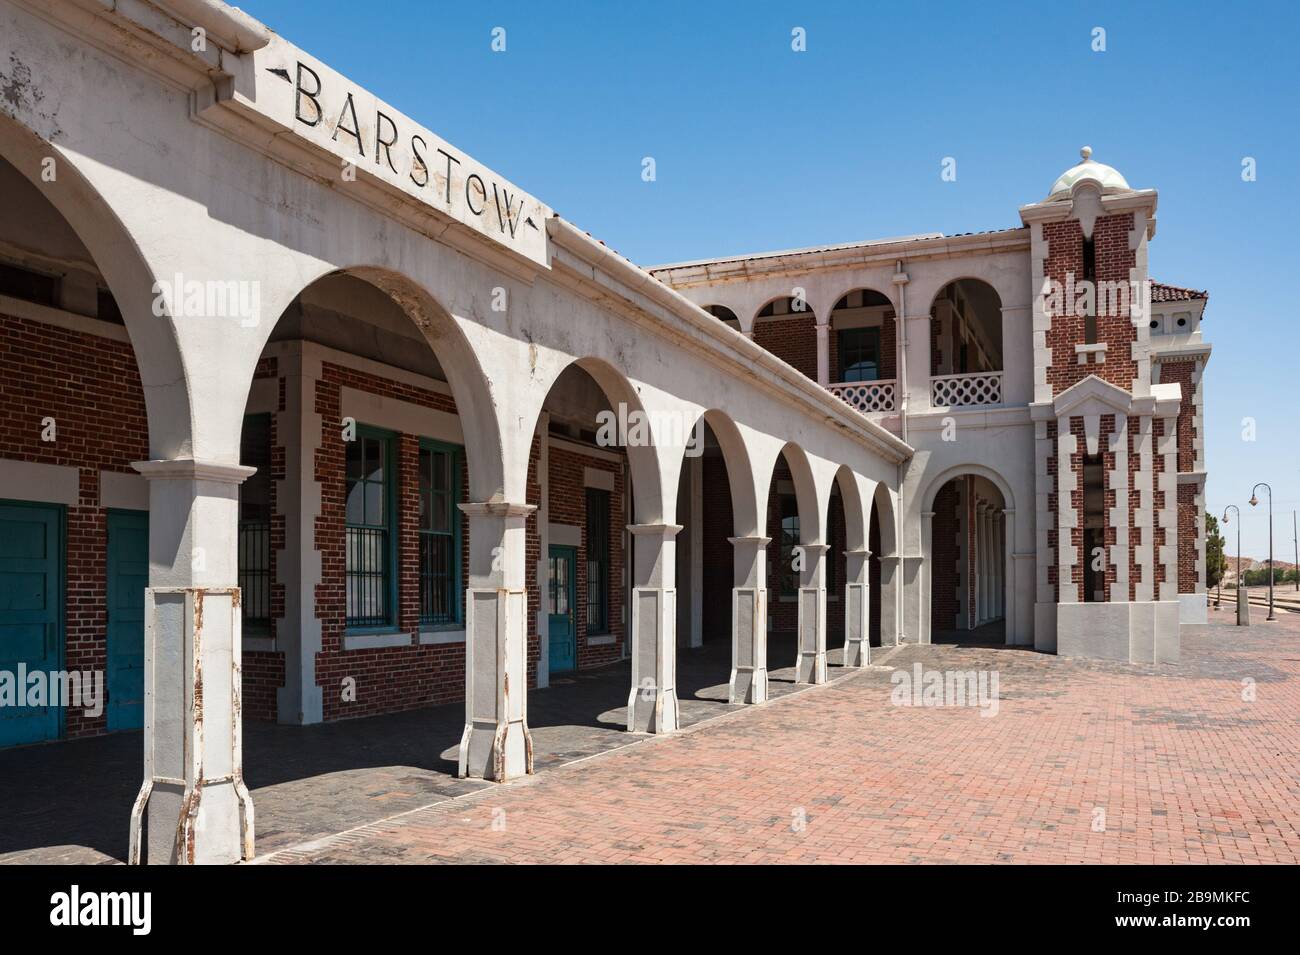 Barstow, California, USA - 23rd April 2013 : View of historic Barstow Harvey House train station in the Mojave Desert. Stock Photo